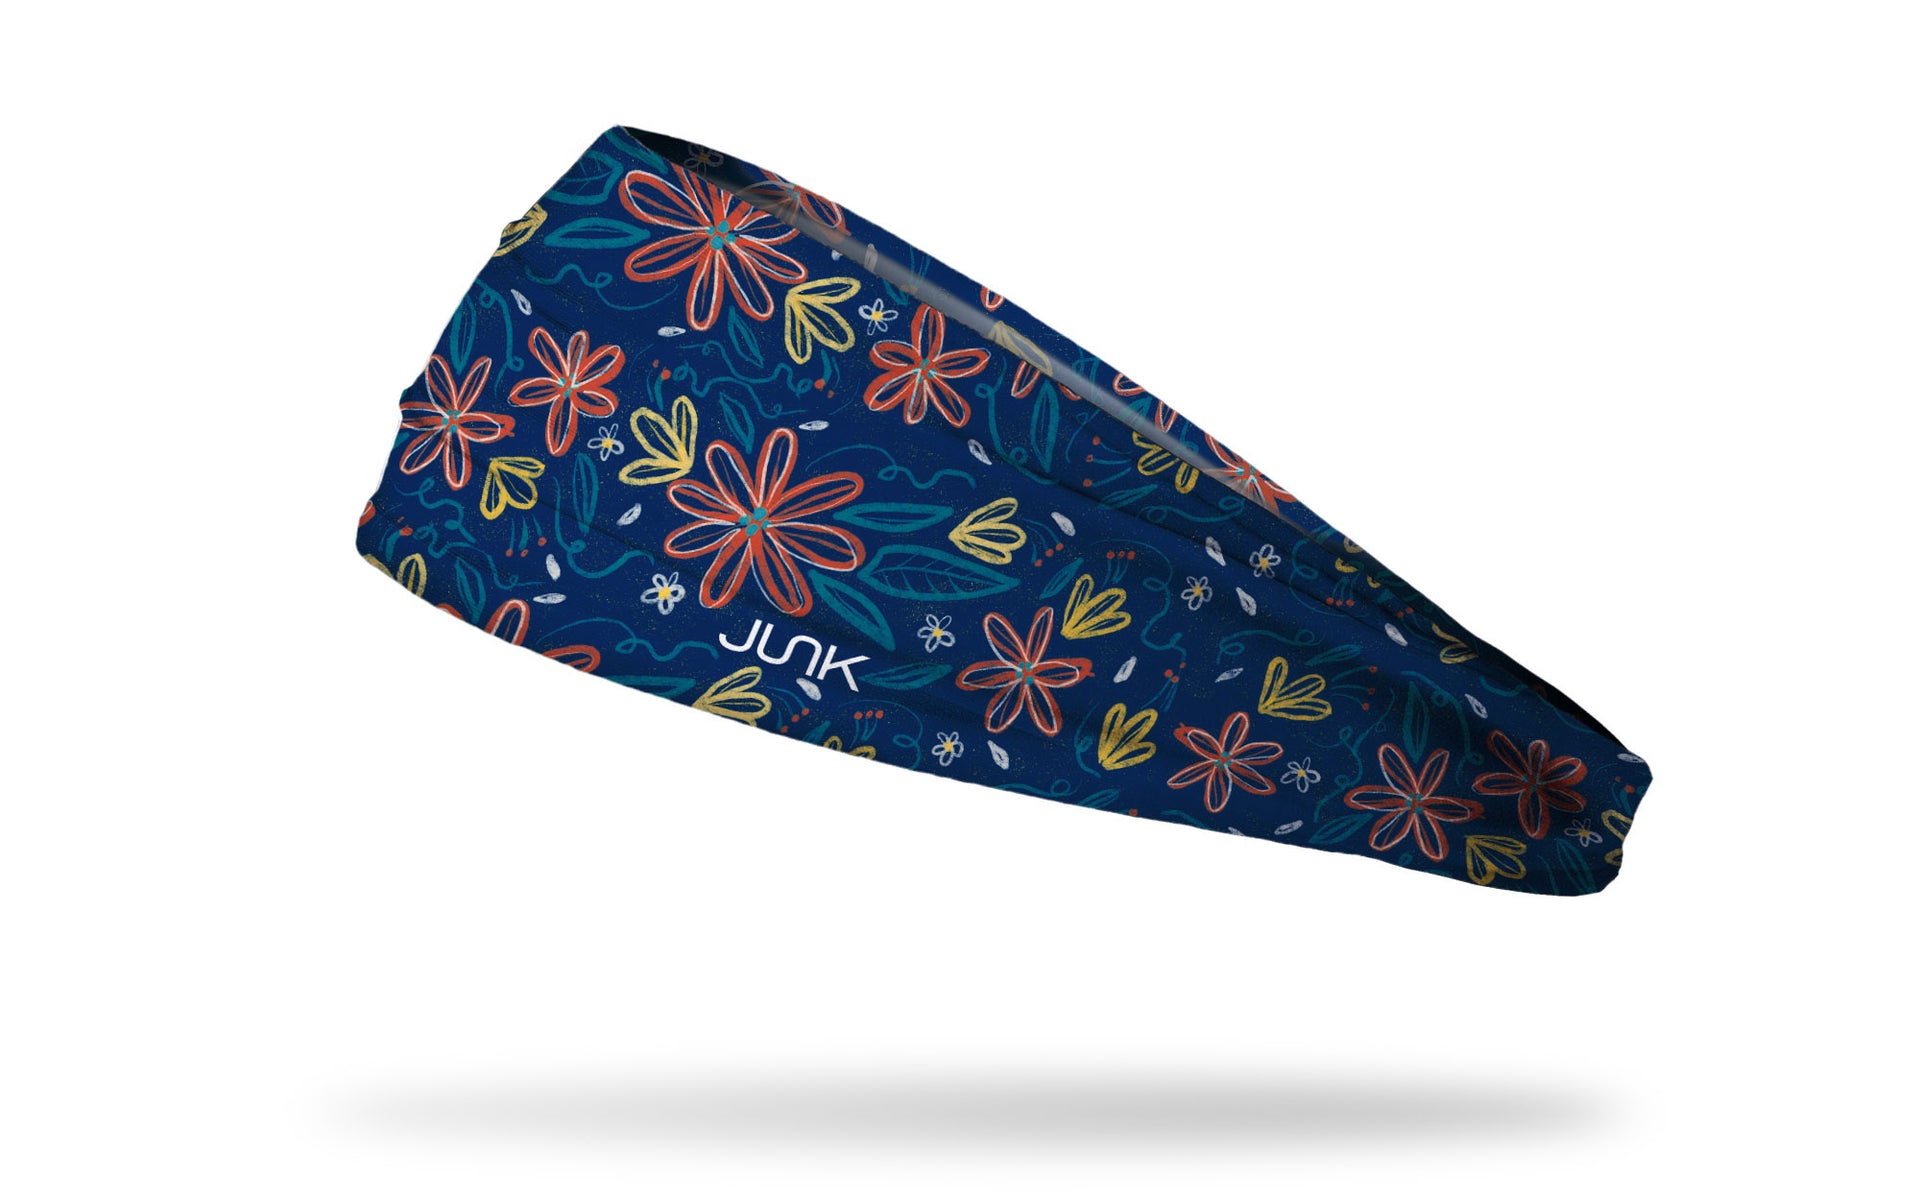 navy headband with repeating pattern of hand drawn daisies made into a daisy chain